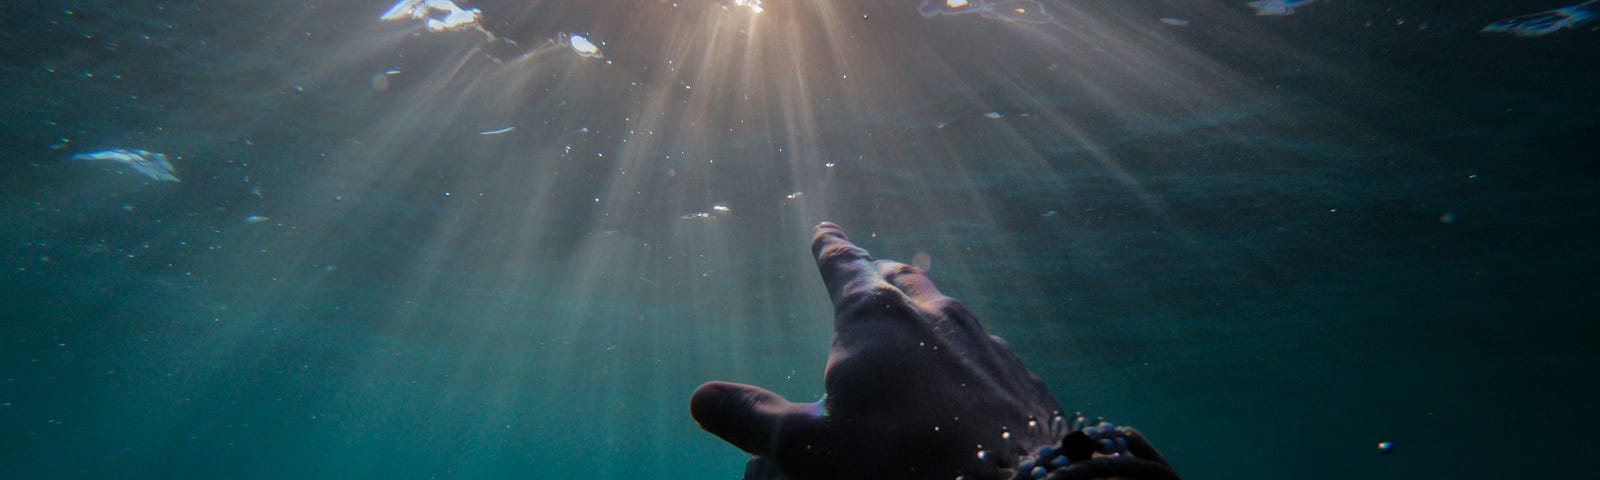 Someone underwater reaching towards the surface of the water through which sunlight reaches out towards them.